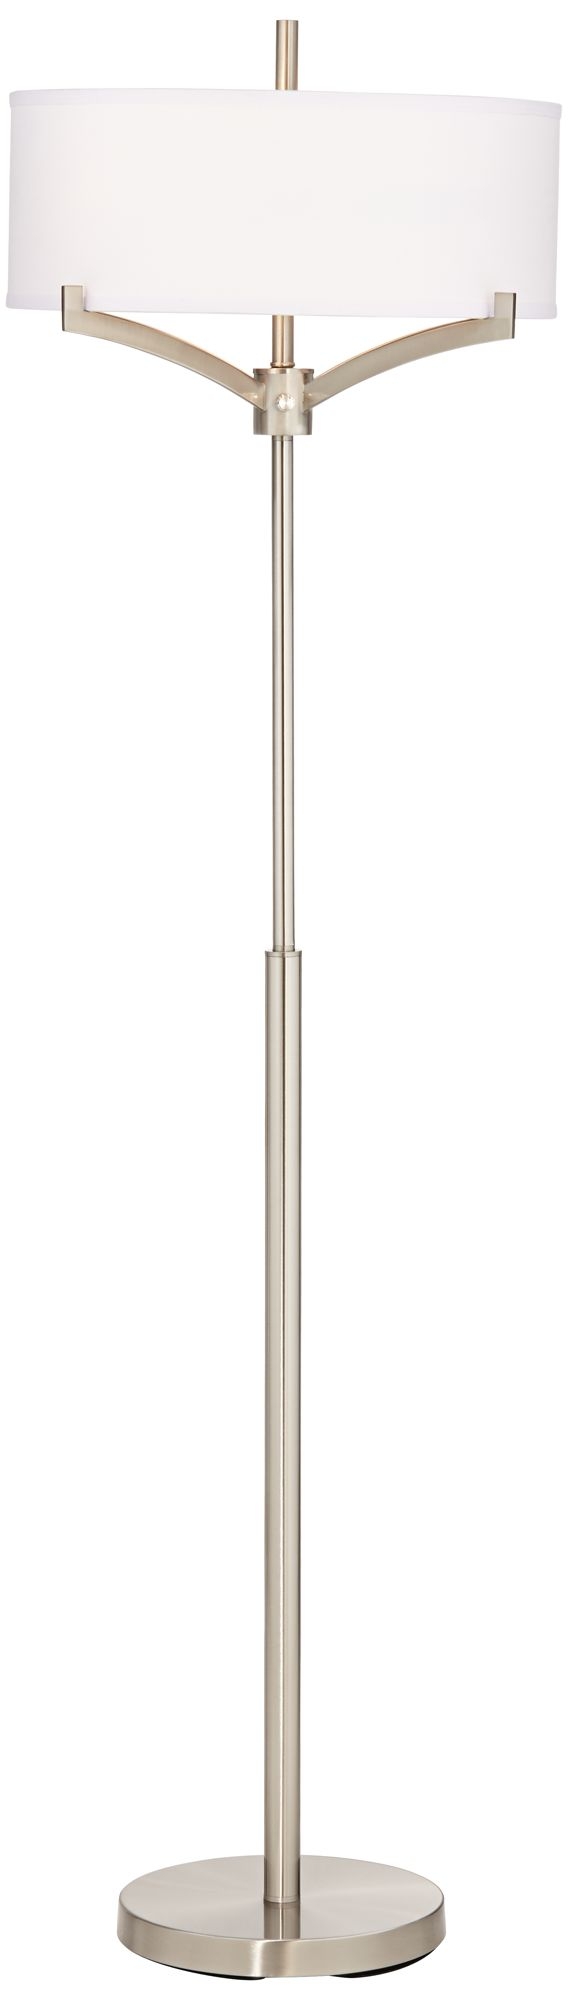 Tremont Brushed Steel Floor Lamp with White Shade - Image 0